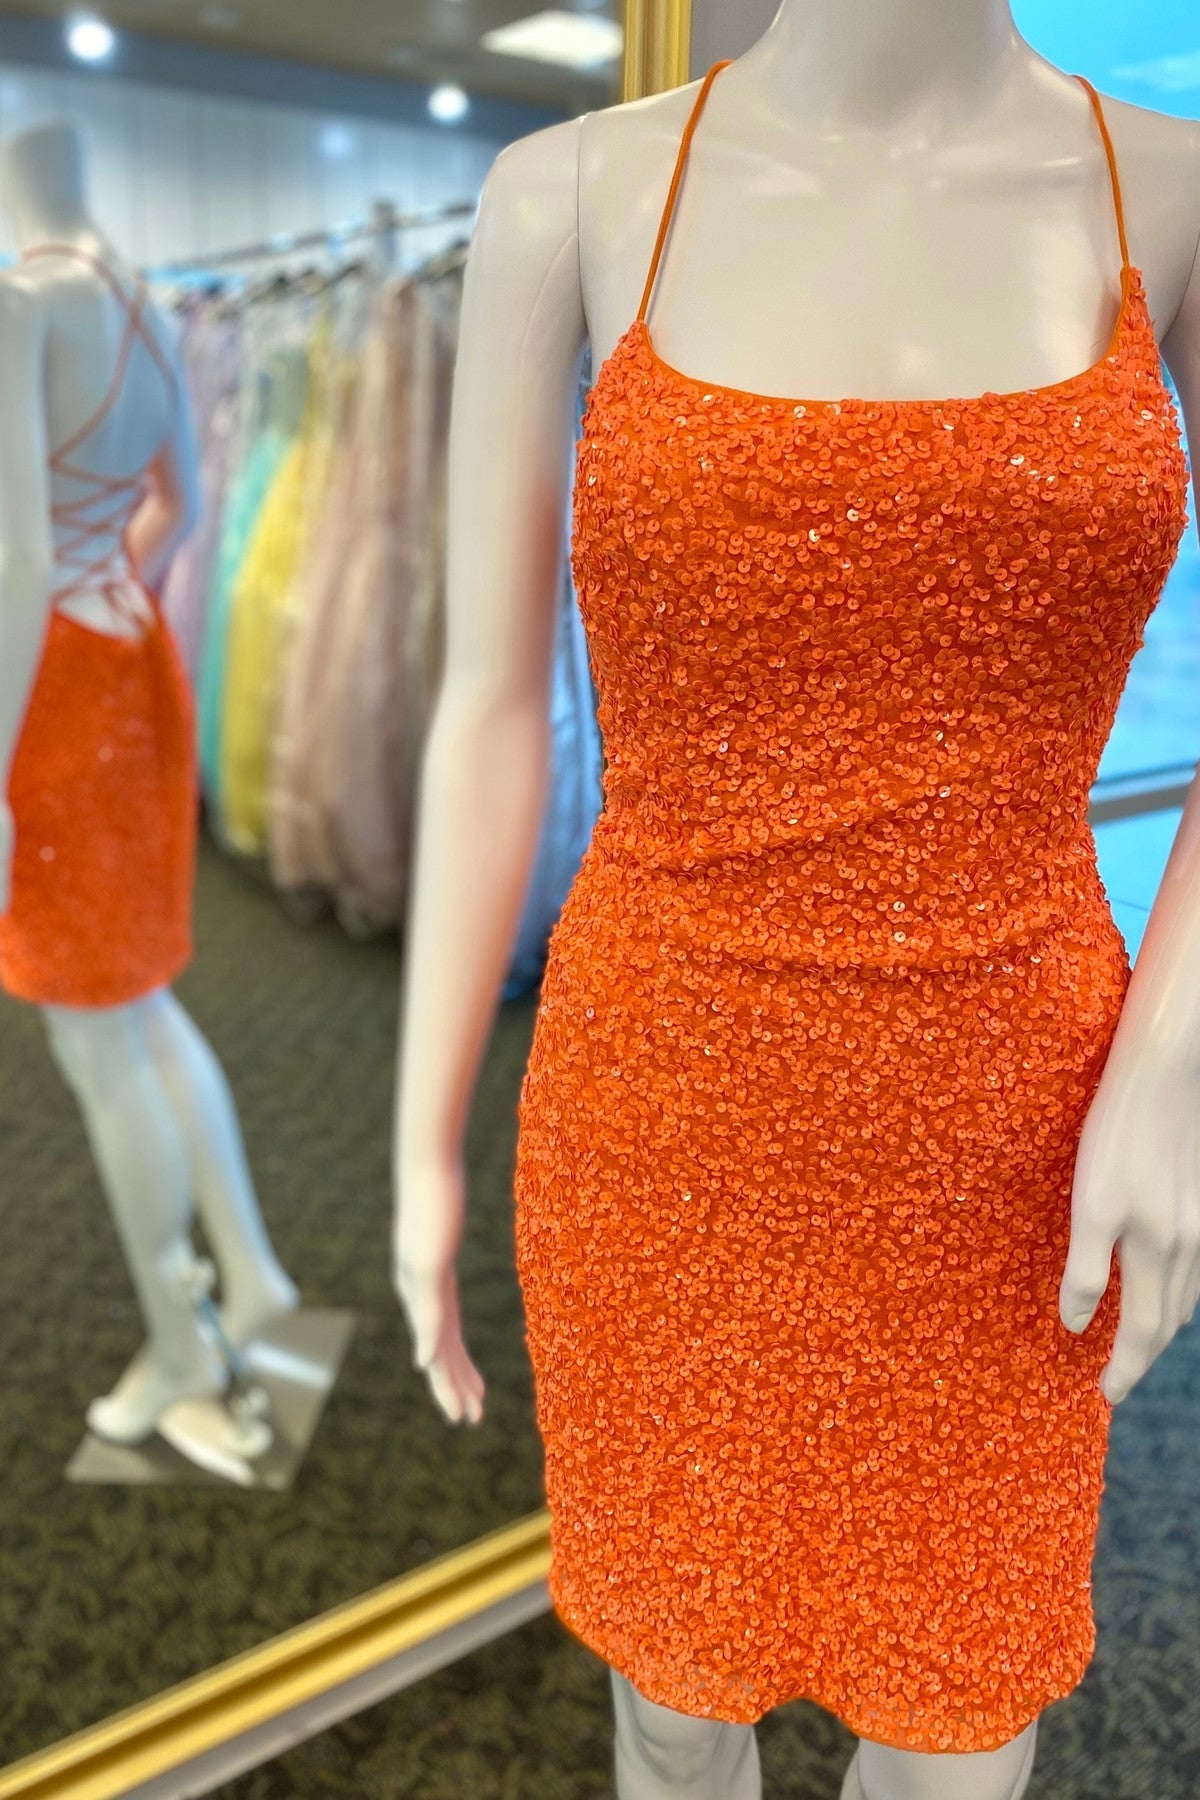 Glitters Orange Sequin Tight Mini Dress with Lace Up Back